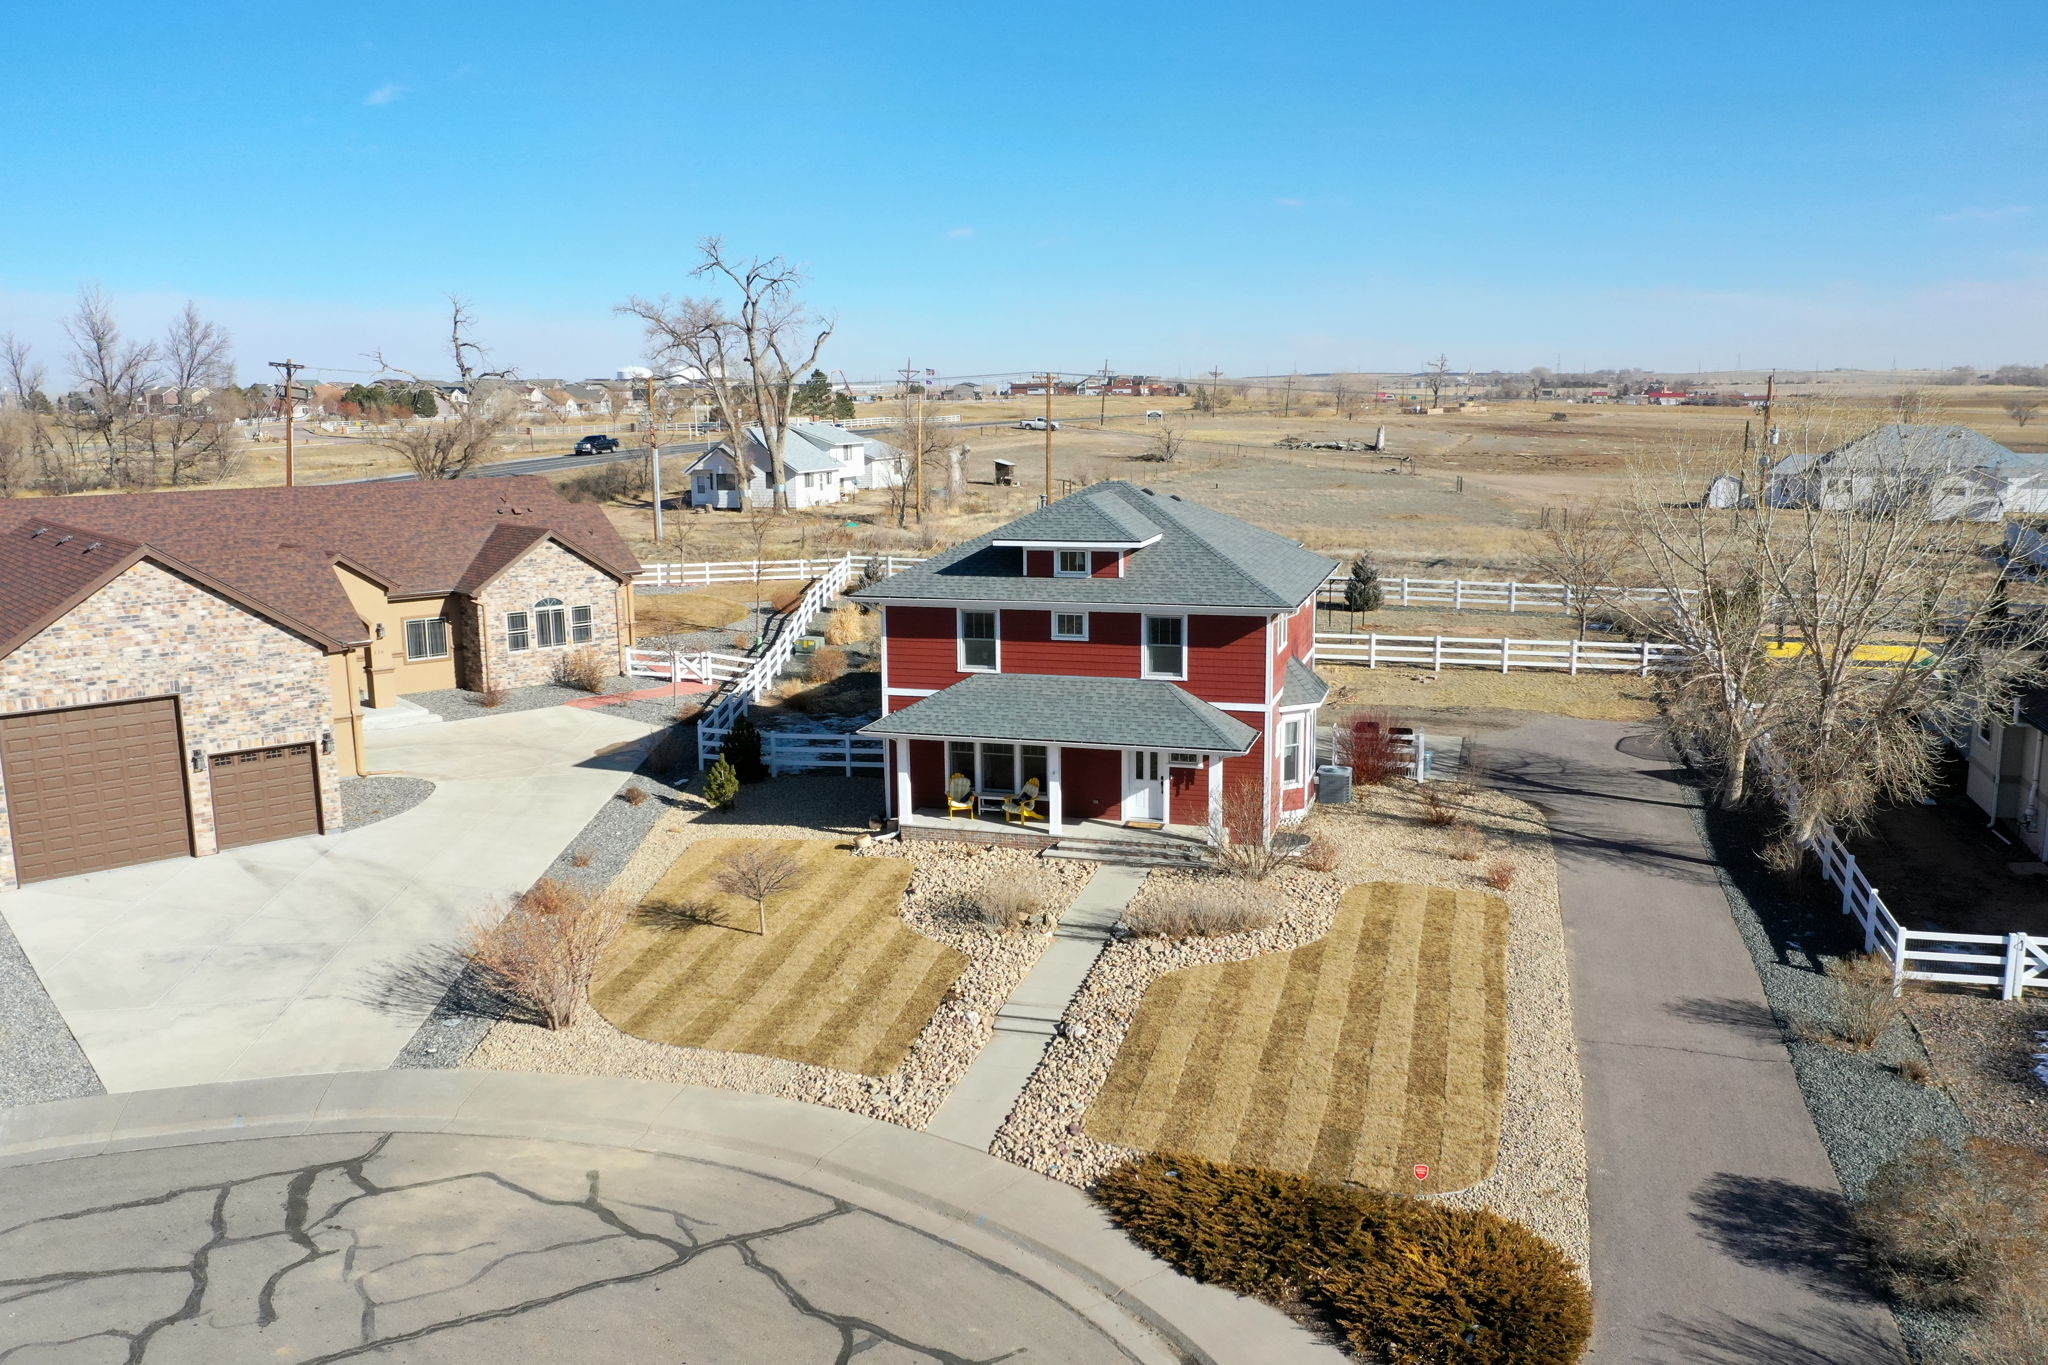  126 S Trail Blazer Rd, Fort Lupton, CO 80621, US Photo 4